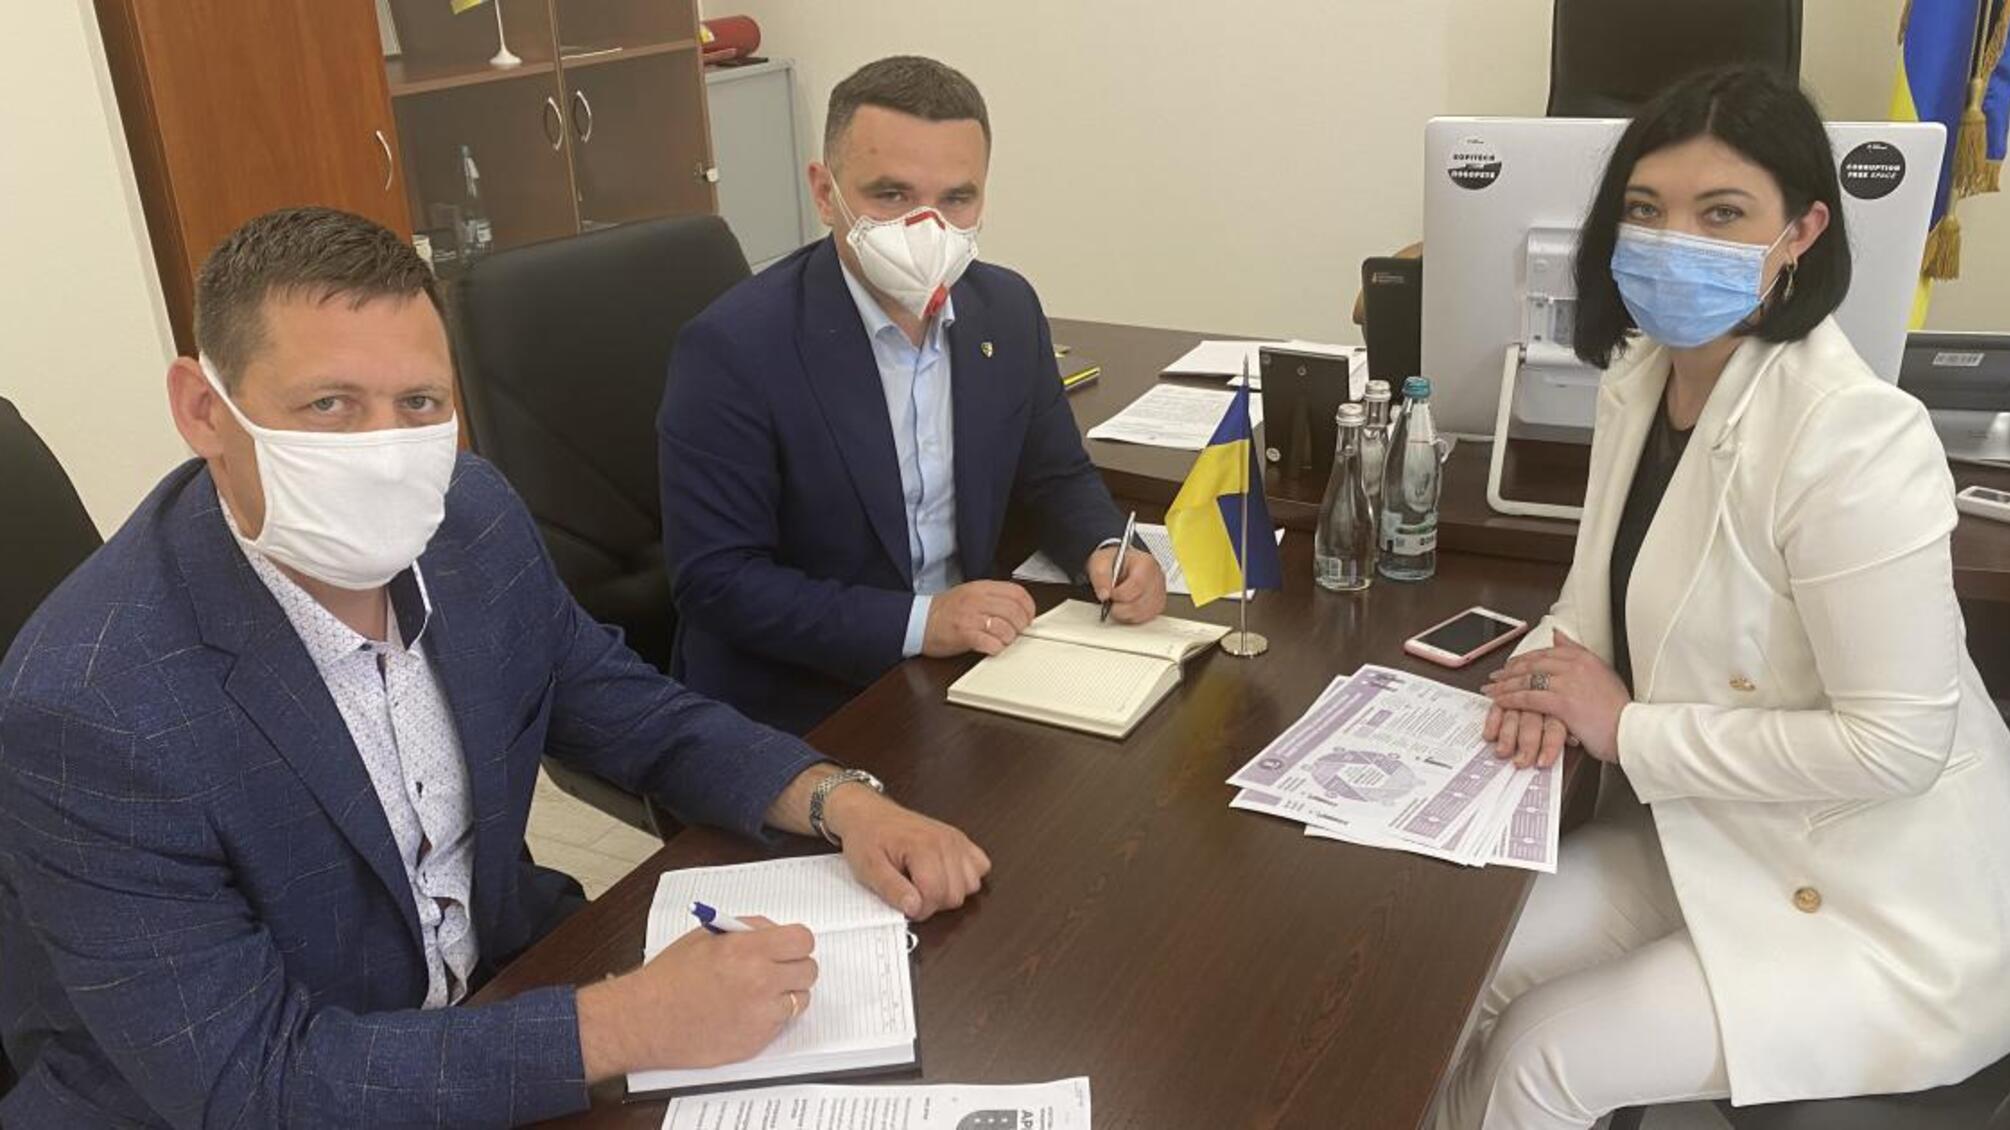 Cooperation between NABU and ARMA strengthens the fight against corruption